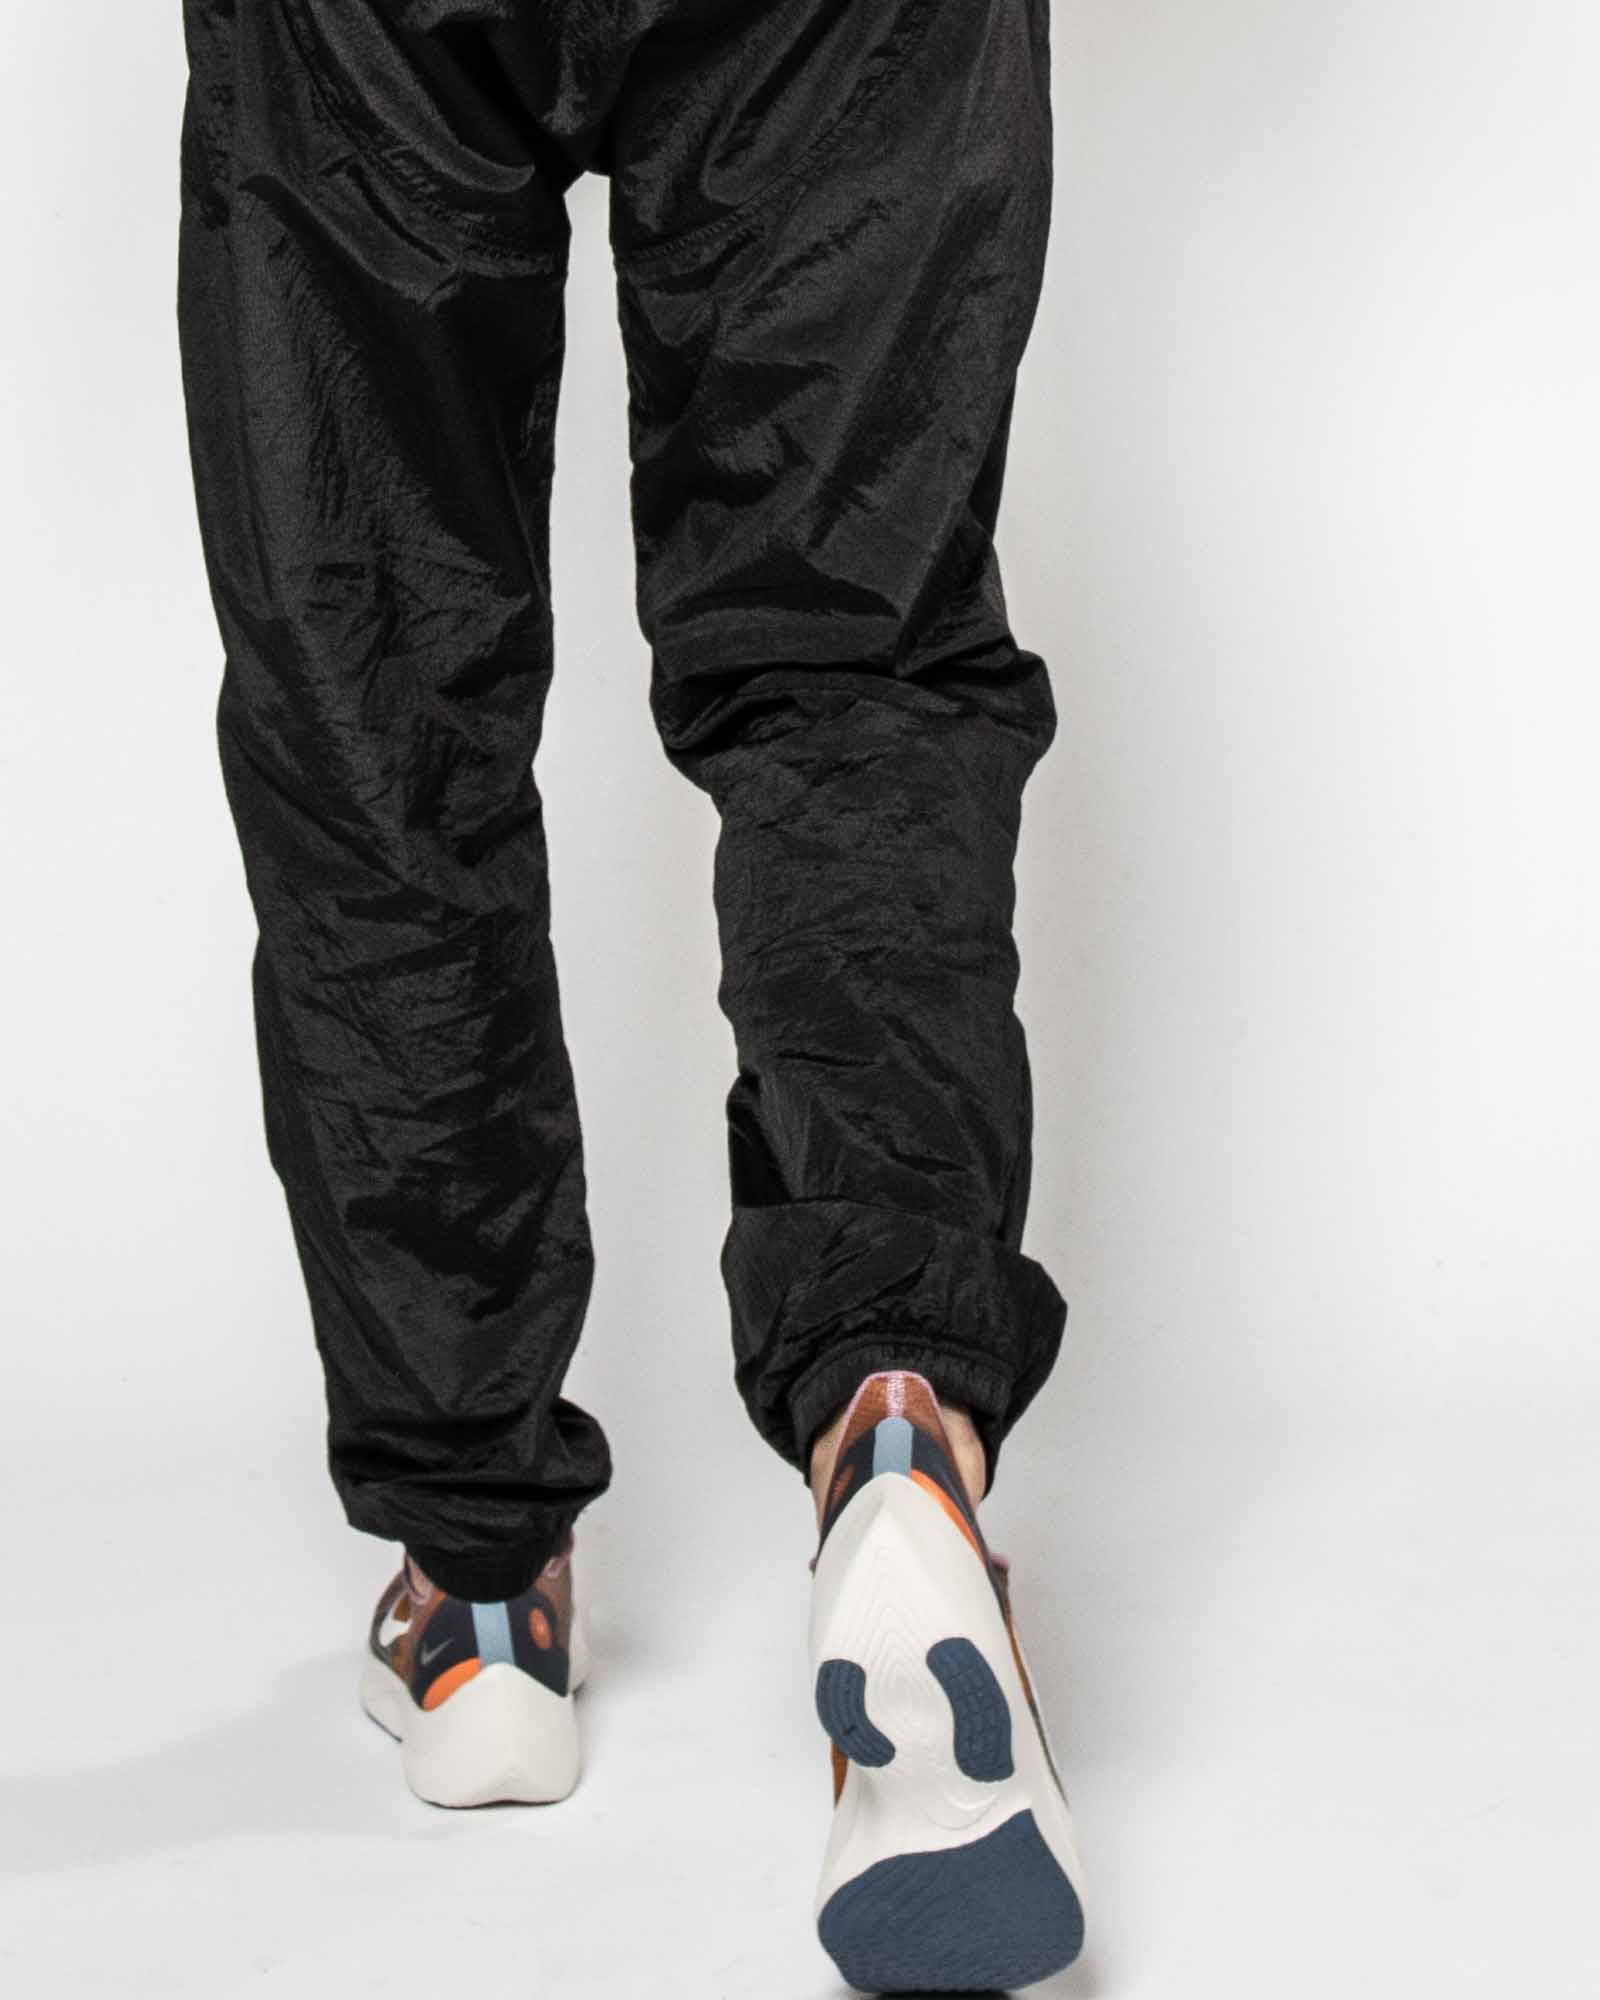 Buy The Alloy Pant